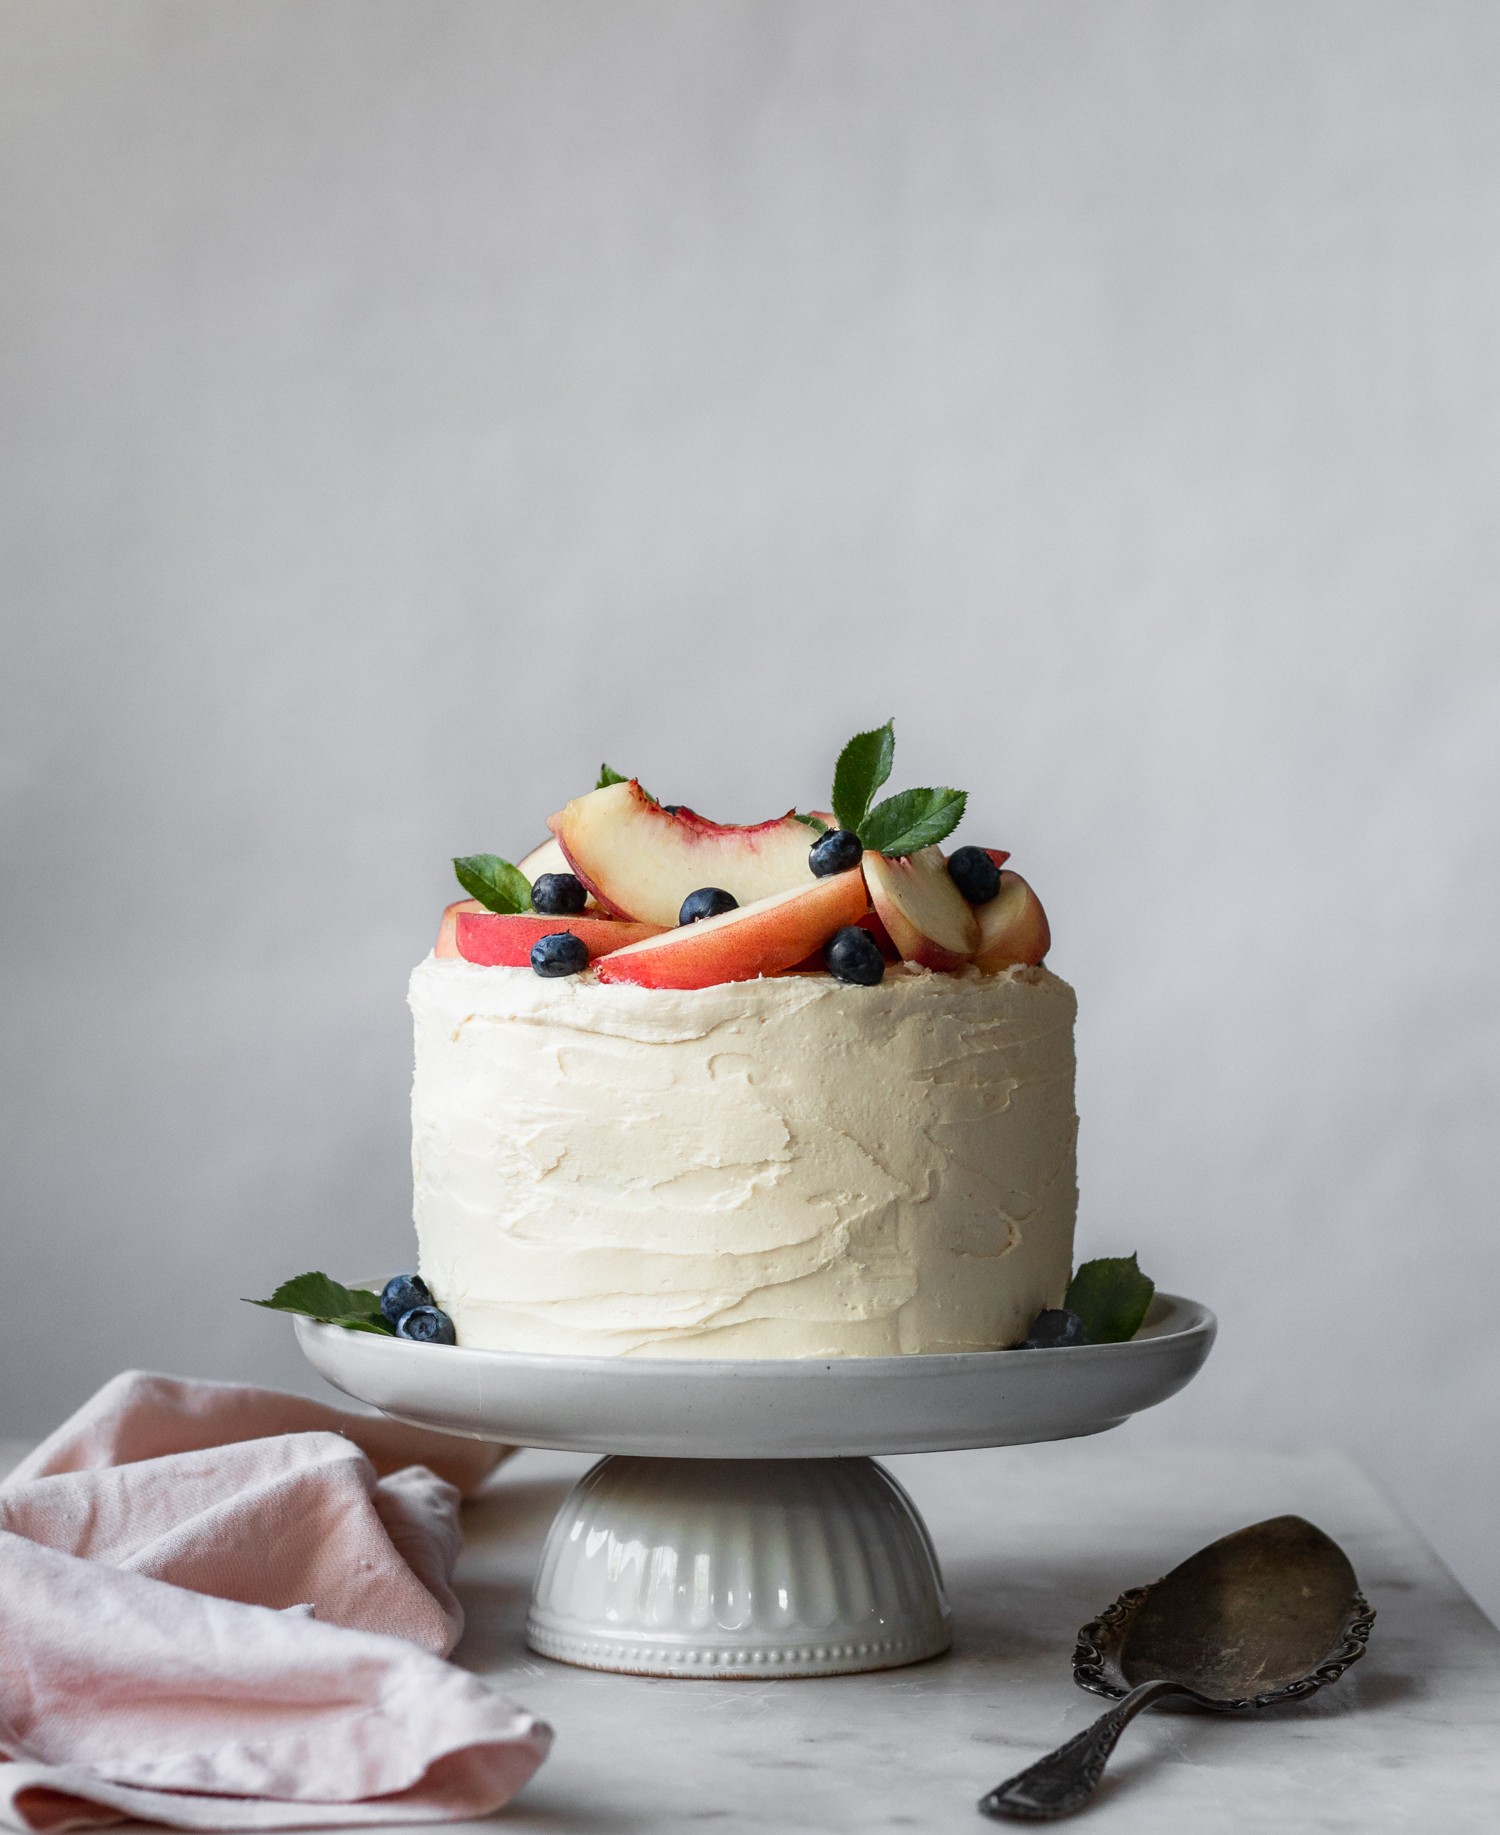 A vanilla cake with peach filling and caramelized white chocolate buttercream decorated with peaches and blueberries on a white cake stand with a white background.